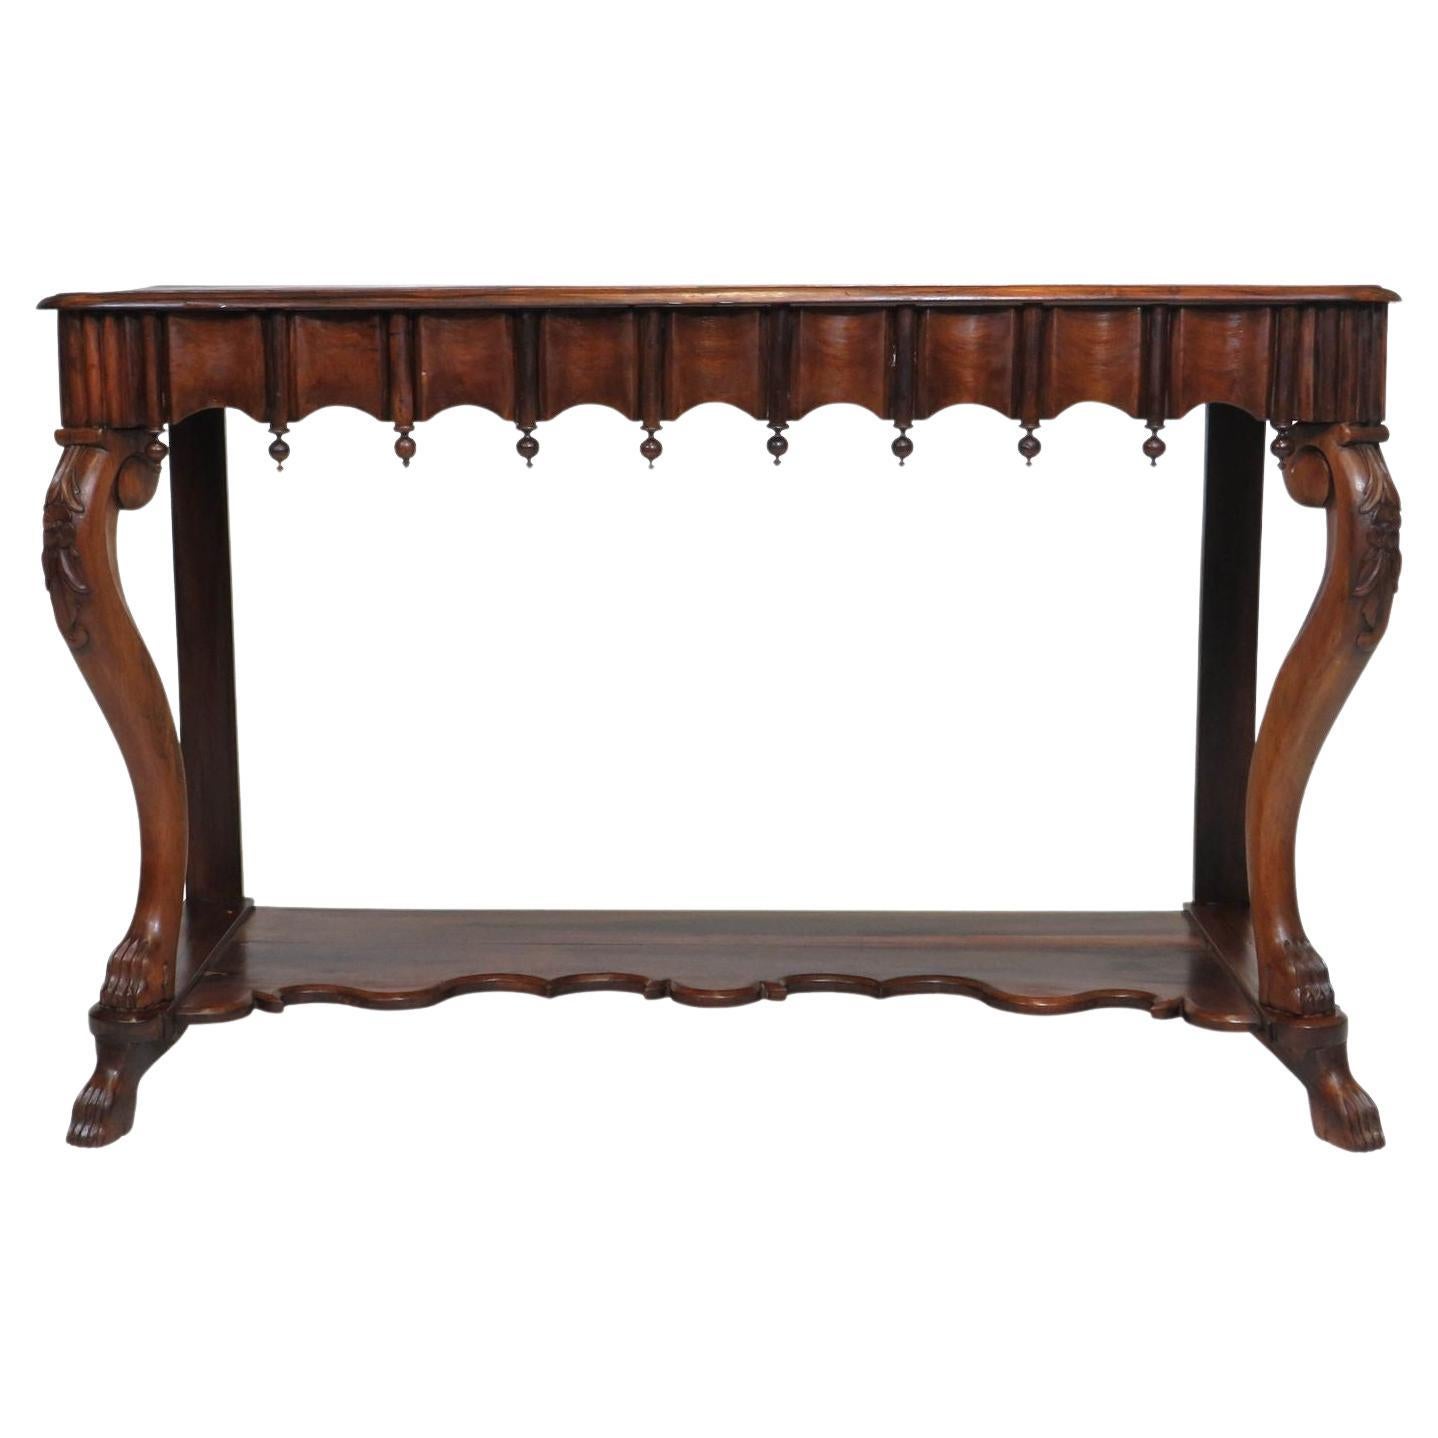 19th c. Gothic Revival Console Table of Solid Brazilian Rosewood